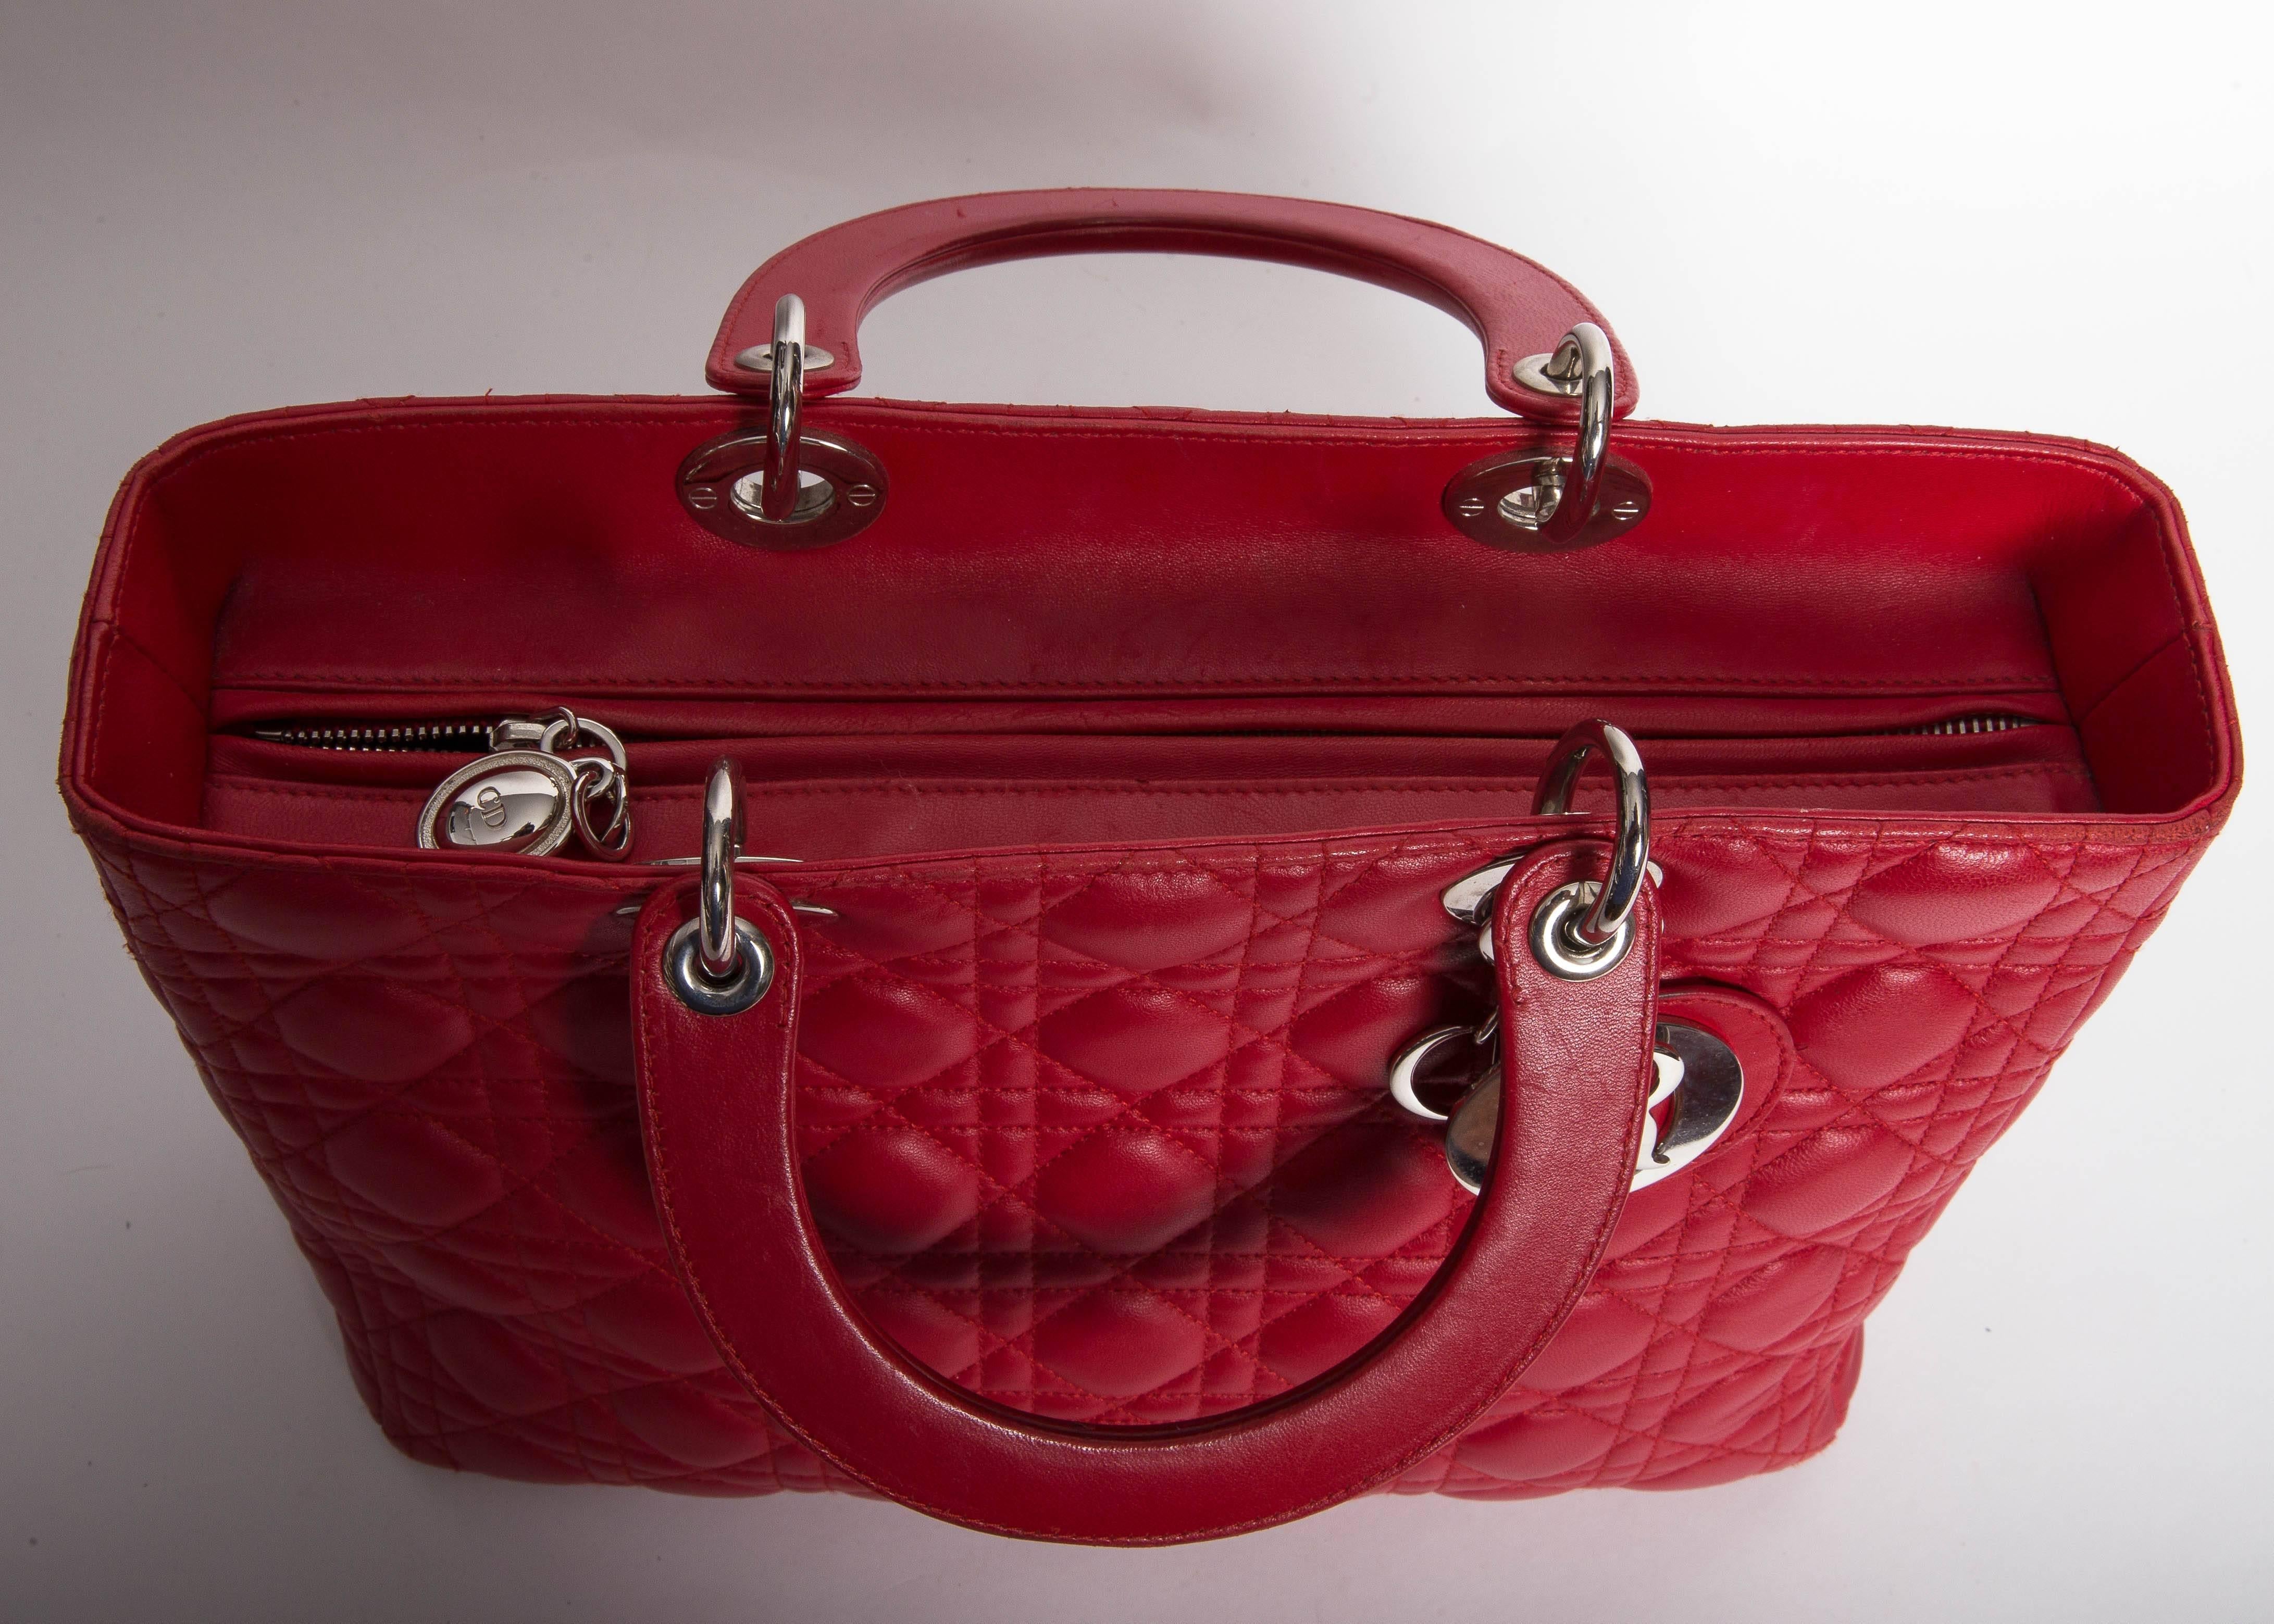 Christian Dior Lady Dior Red Leather Bag with Silver Hardware 2